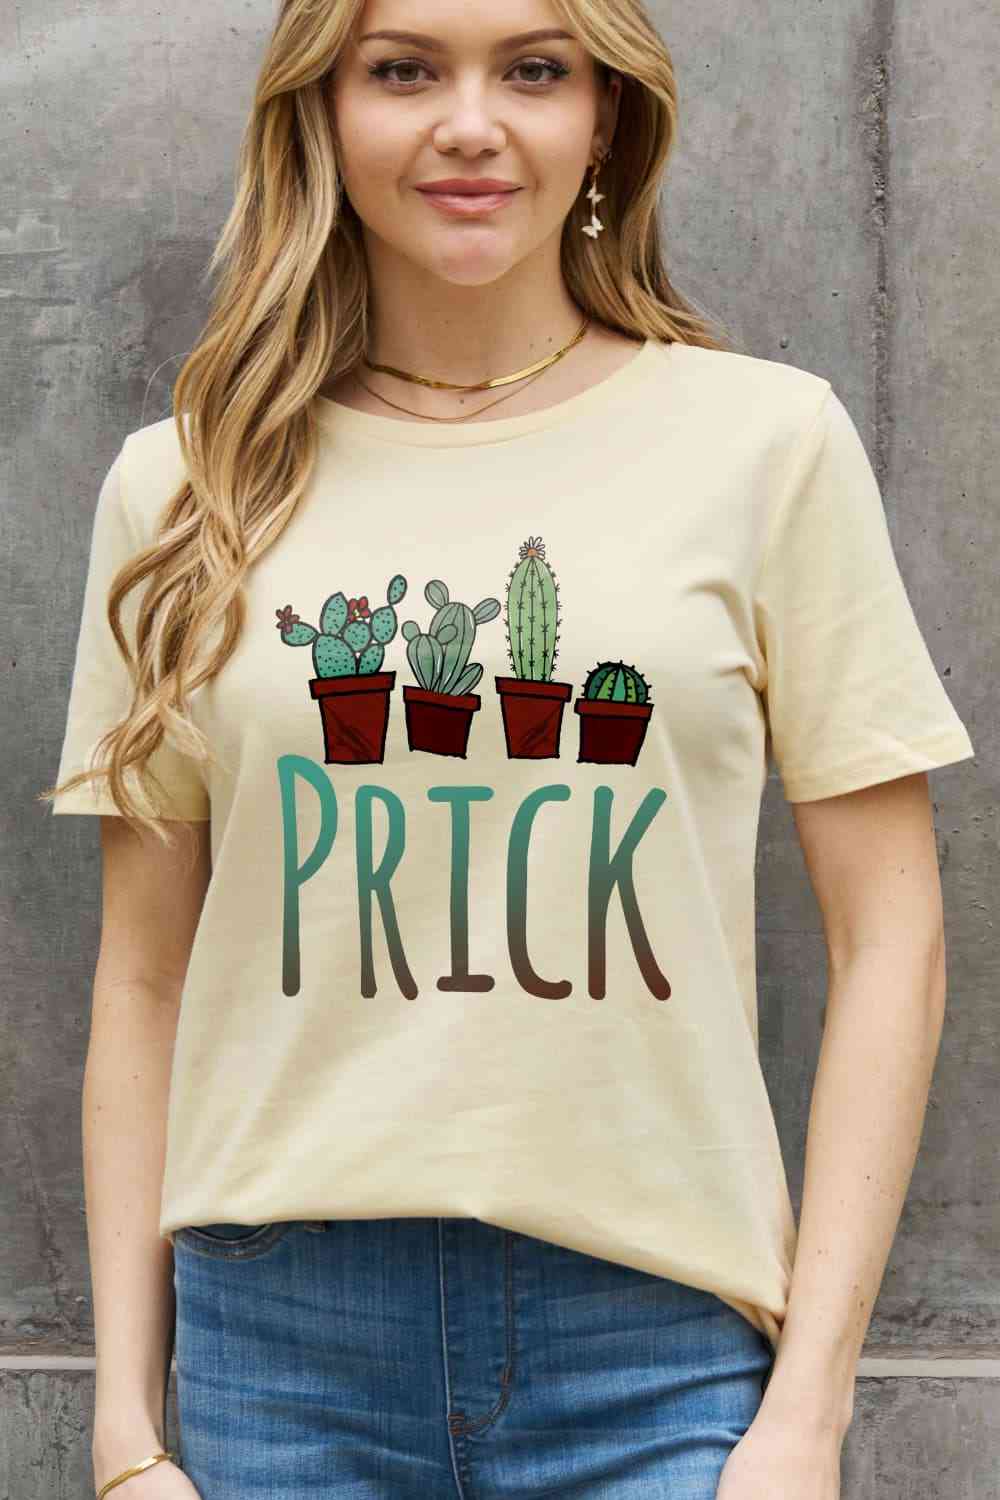 PRICK Graphic Cotton Tee - Ivory / S - T-Shirts - Shirts & Tops - 13 - 2024